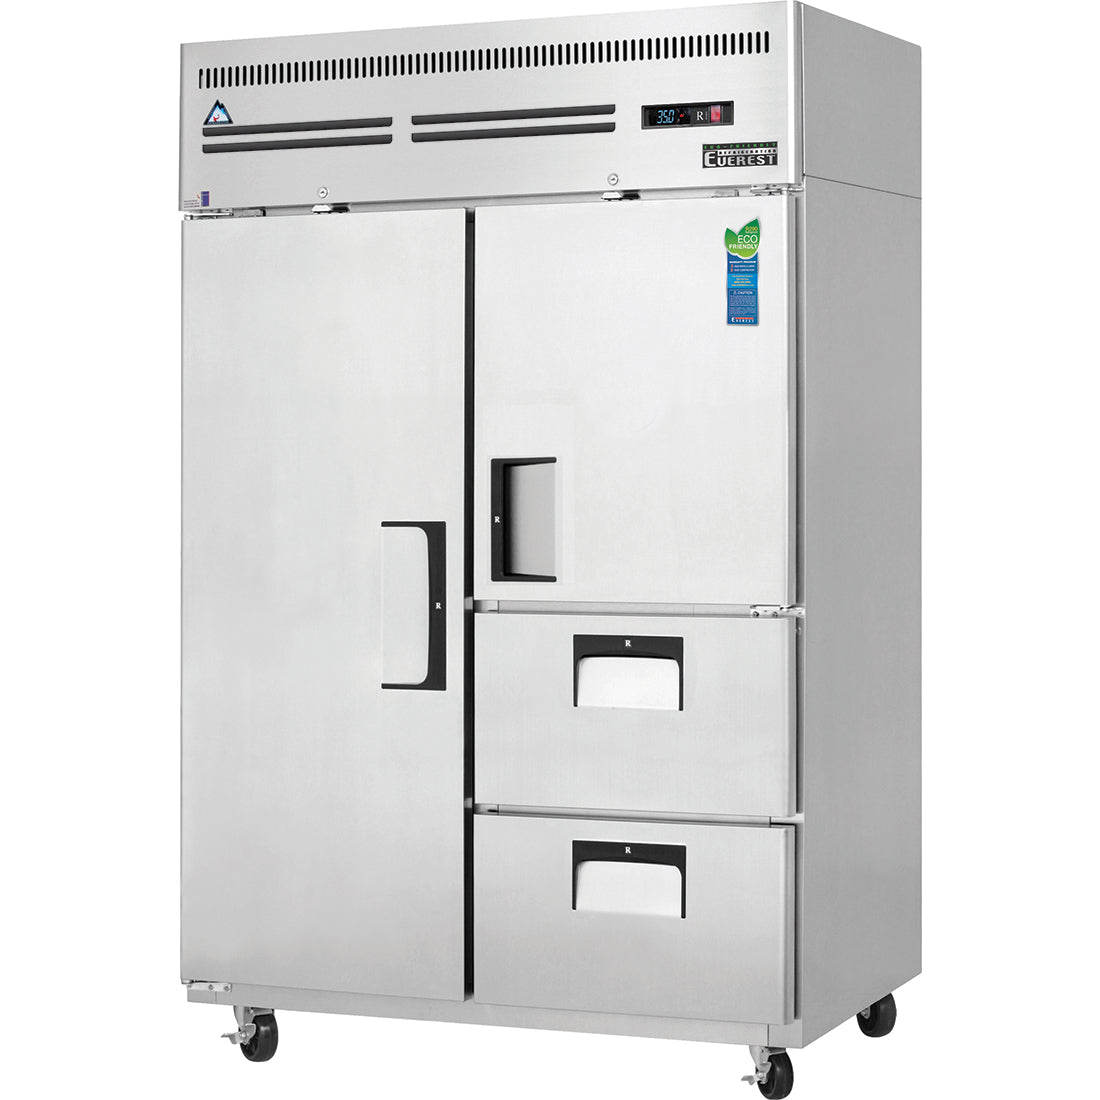 Everest ES Series-ESR2D2 Two Section Full/Half Door and Drawer Combo Upright Reach-In Refrigerator - 48 Cu. Ft.